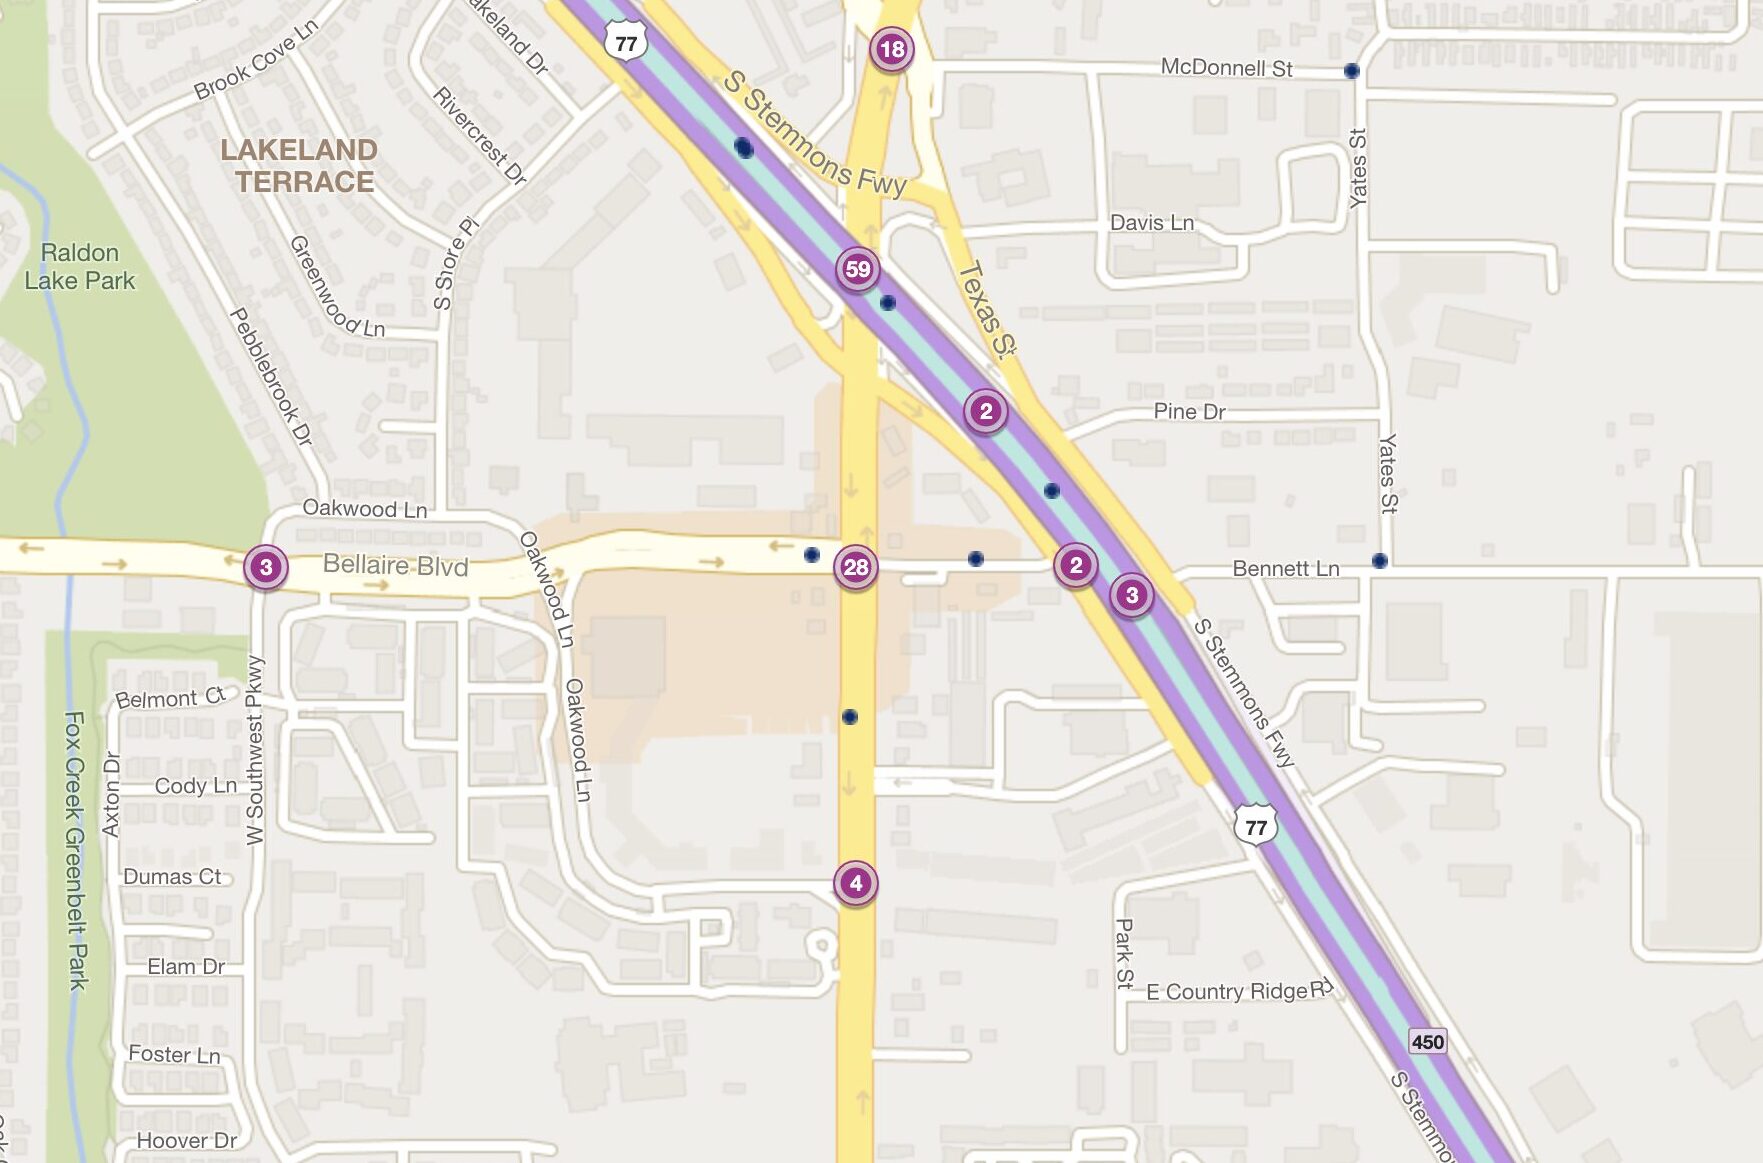 Cluster Map of 2023 Car Accidents at Bus TX-121 & Bellaire Blvd. (TXDOT)